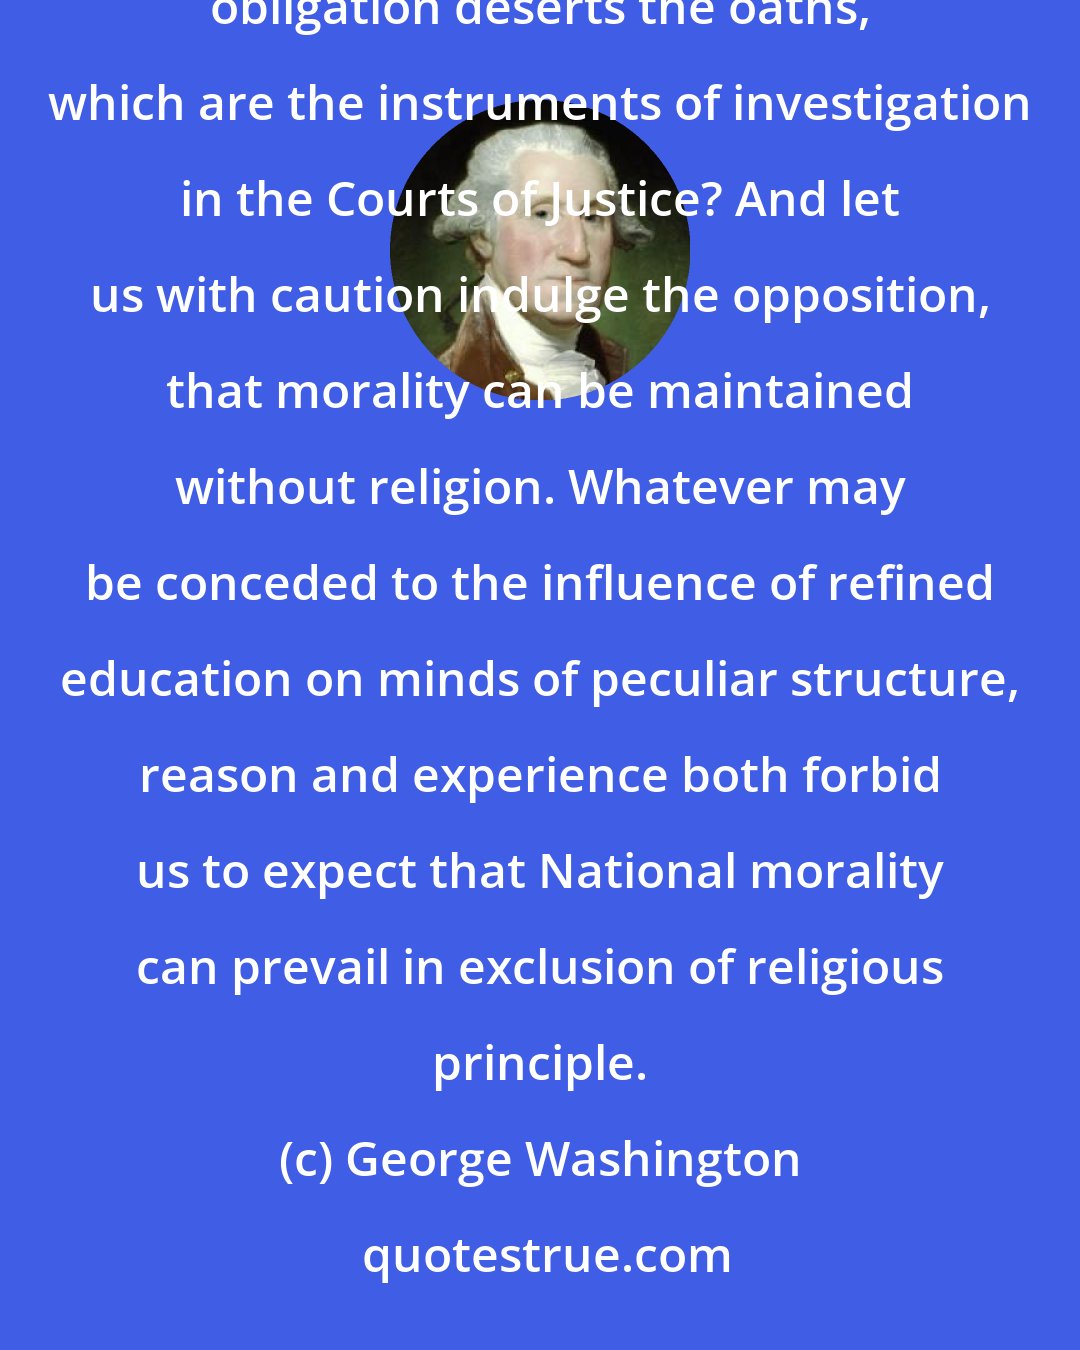 George Washington: Let it simply be asked where is the security for property, for reputation, for life, if the sense of religious obligation deserts the oaths, which are the instruments of investigation in the Courts of Justice? And let us with caution indulge the opposition, that morality can be maintained without religion. Whatever may be conceded to the influence of refined education on minds of peculiar structure, reason and experience both forbid us to expect that National morality can prevail in exclusion of religious principle.